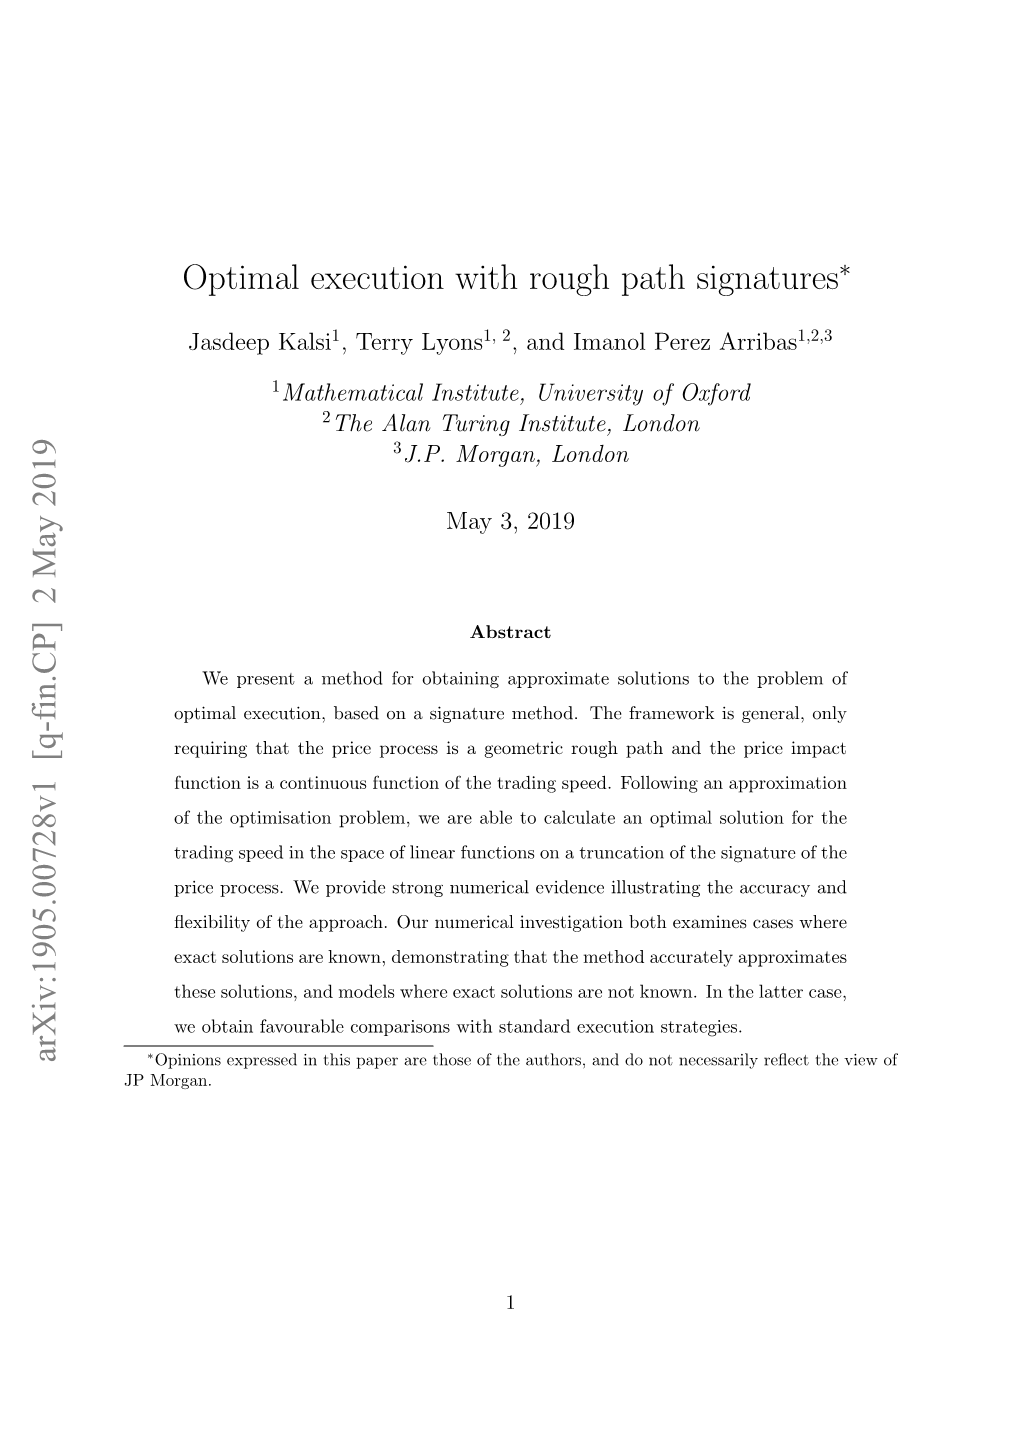 Optimal Execution with Rough Path Signatures Arxiv:1905.00728V1 [Q-Fin.CP]